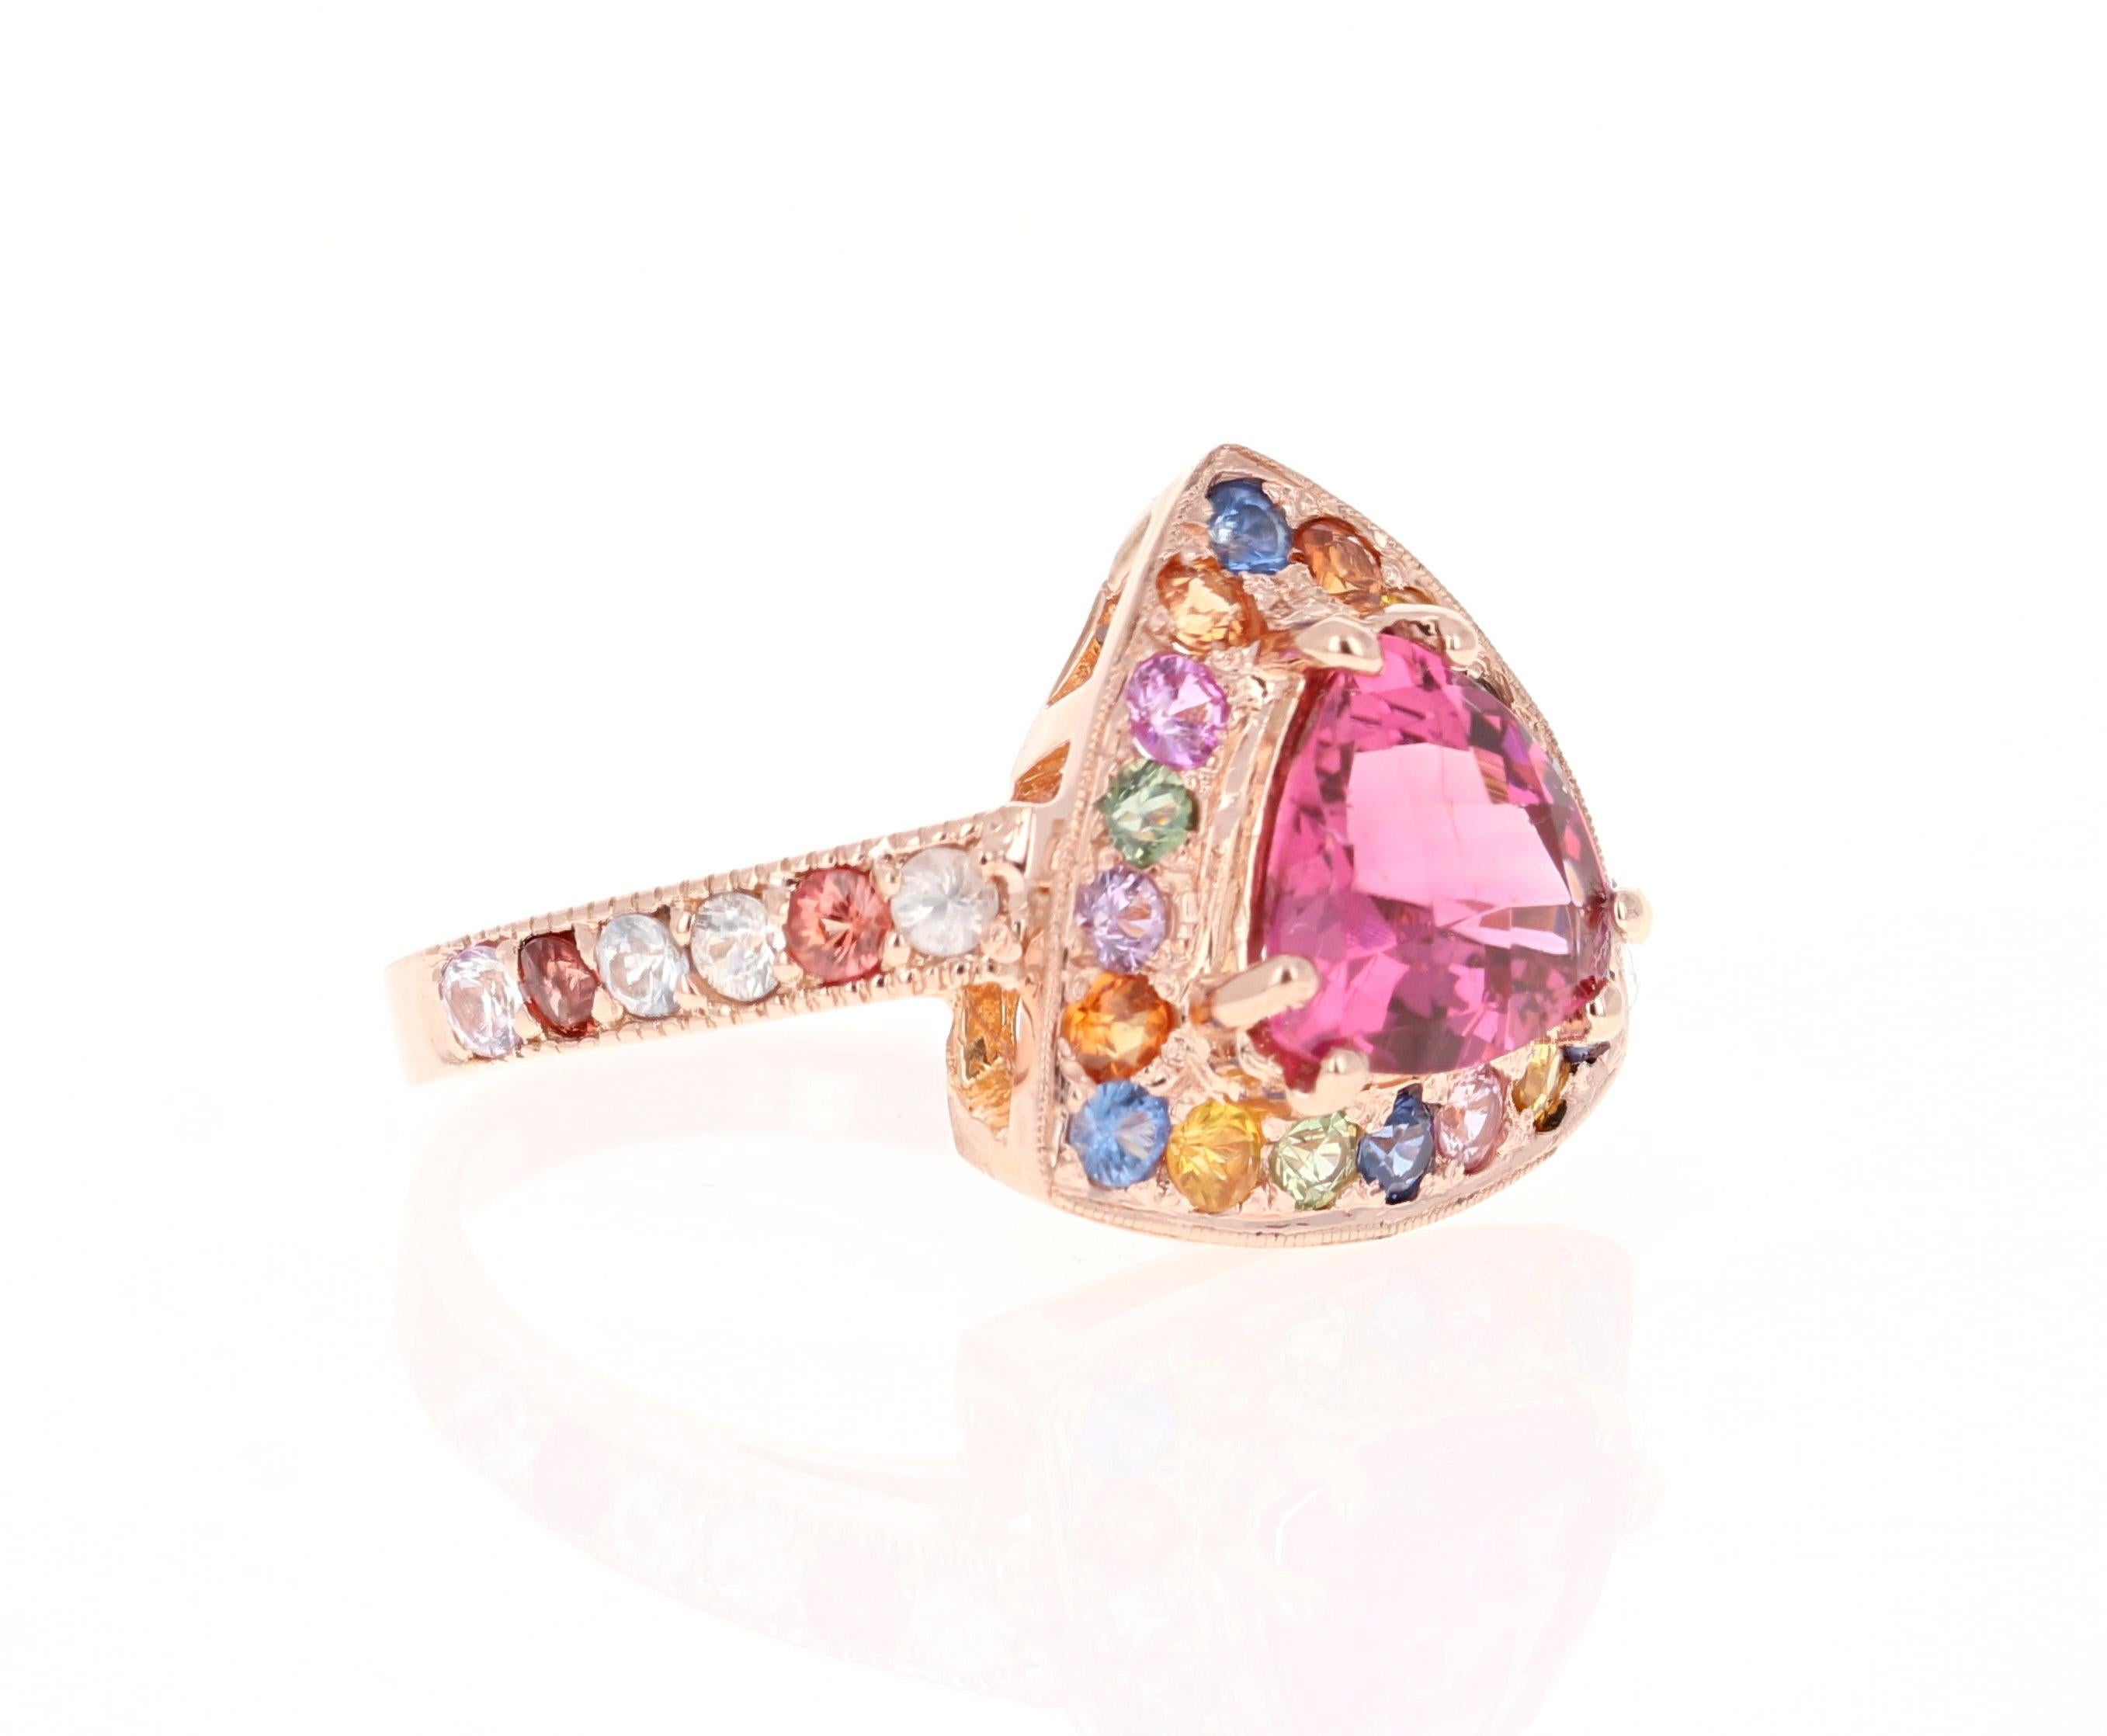 This ring has a Trillion Cut Tourmaline that weighs 1.62 carats and is surrounded by 30 Multi Sapphires that weigh 1.37 carats. The total carat weight of this ring is 2.99 carats. 

This ring is casted in 14K Rose Gold and weighs approximately 5.0